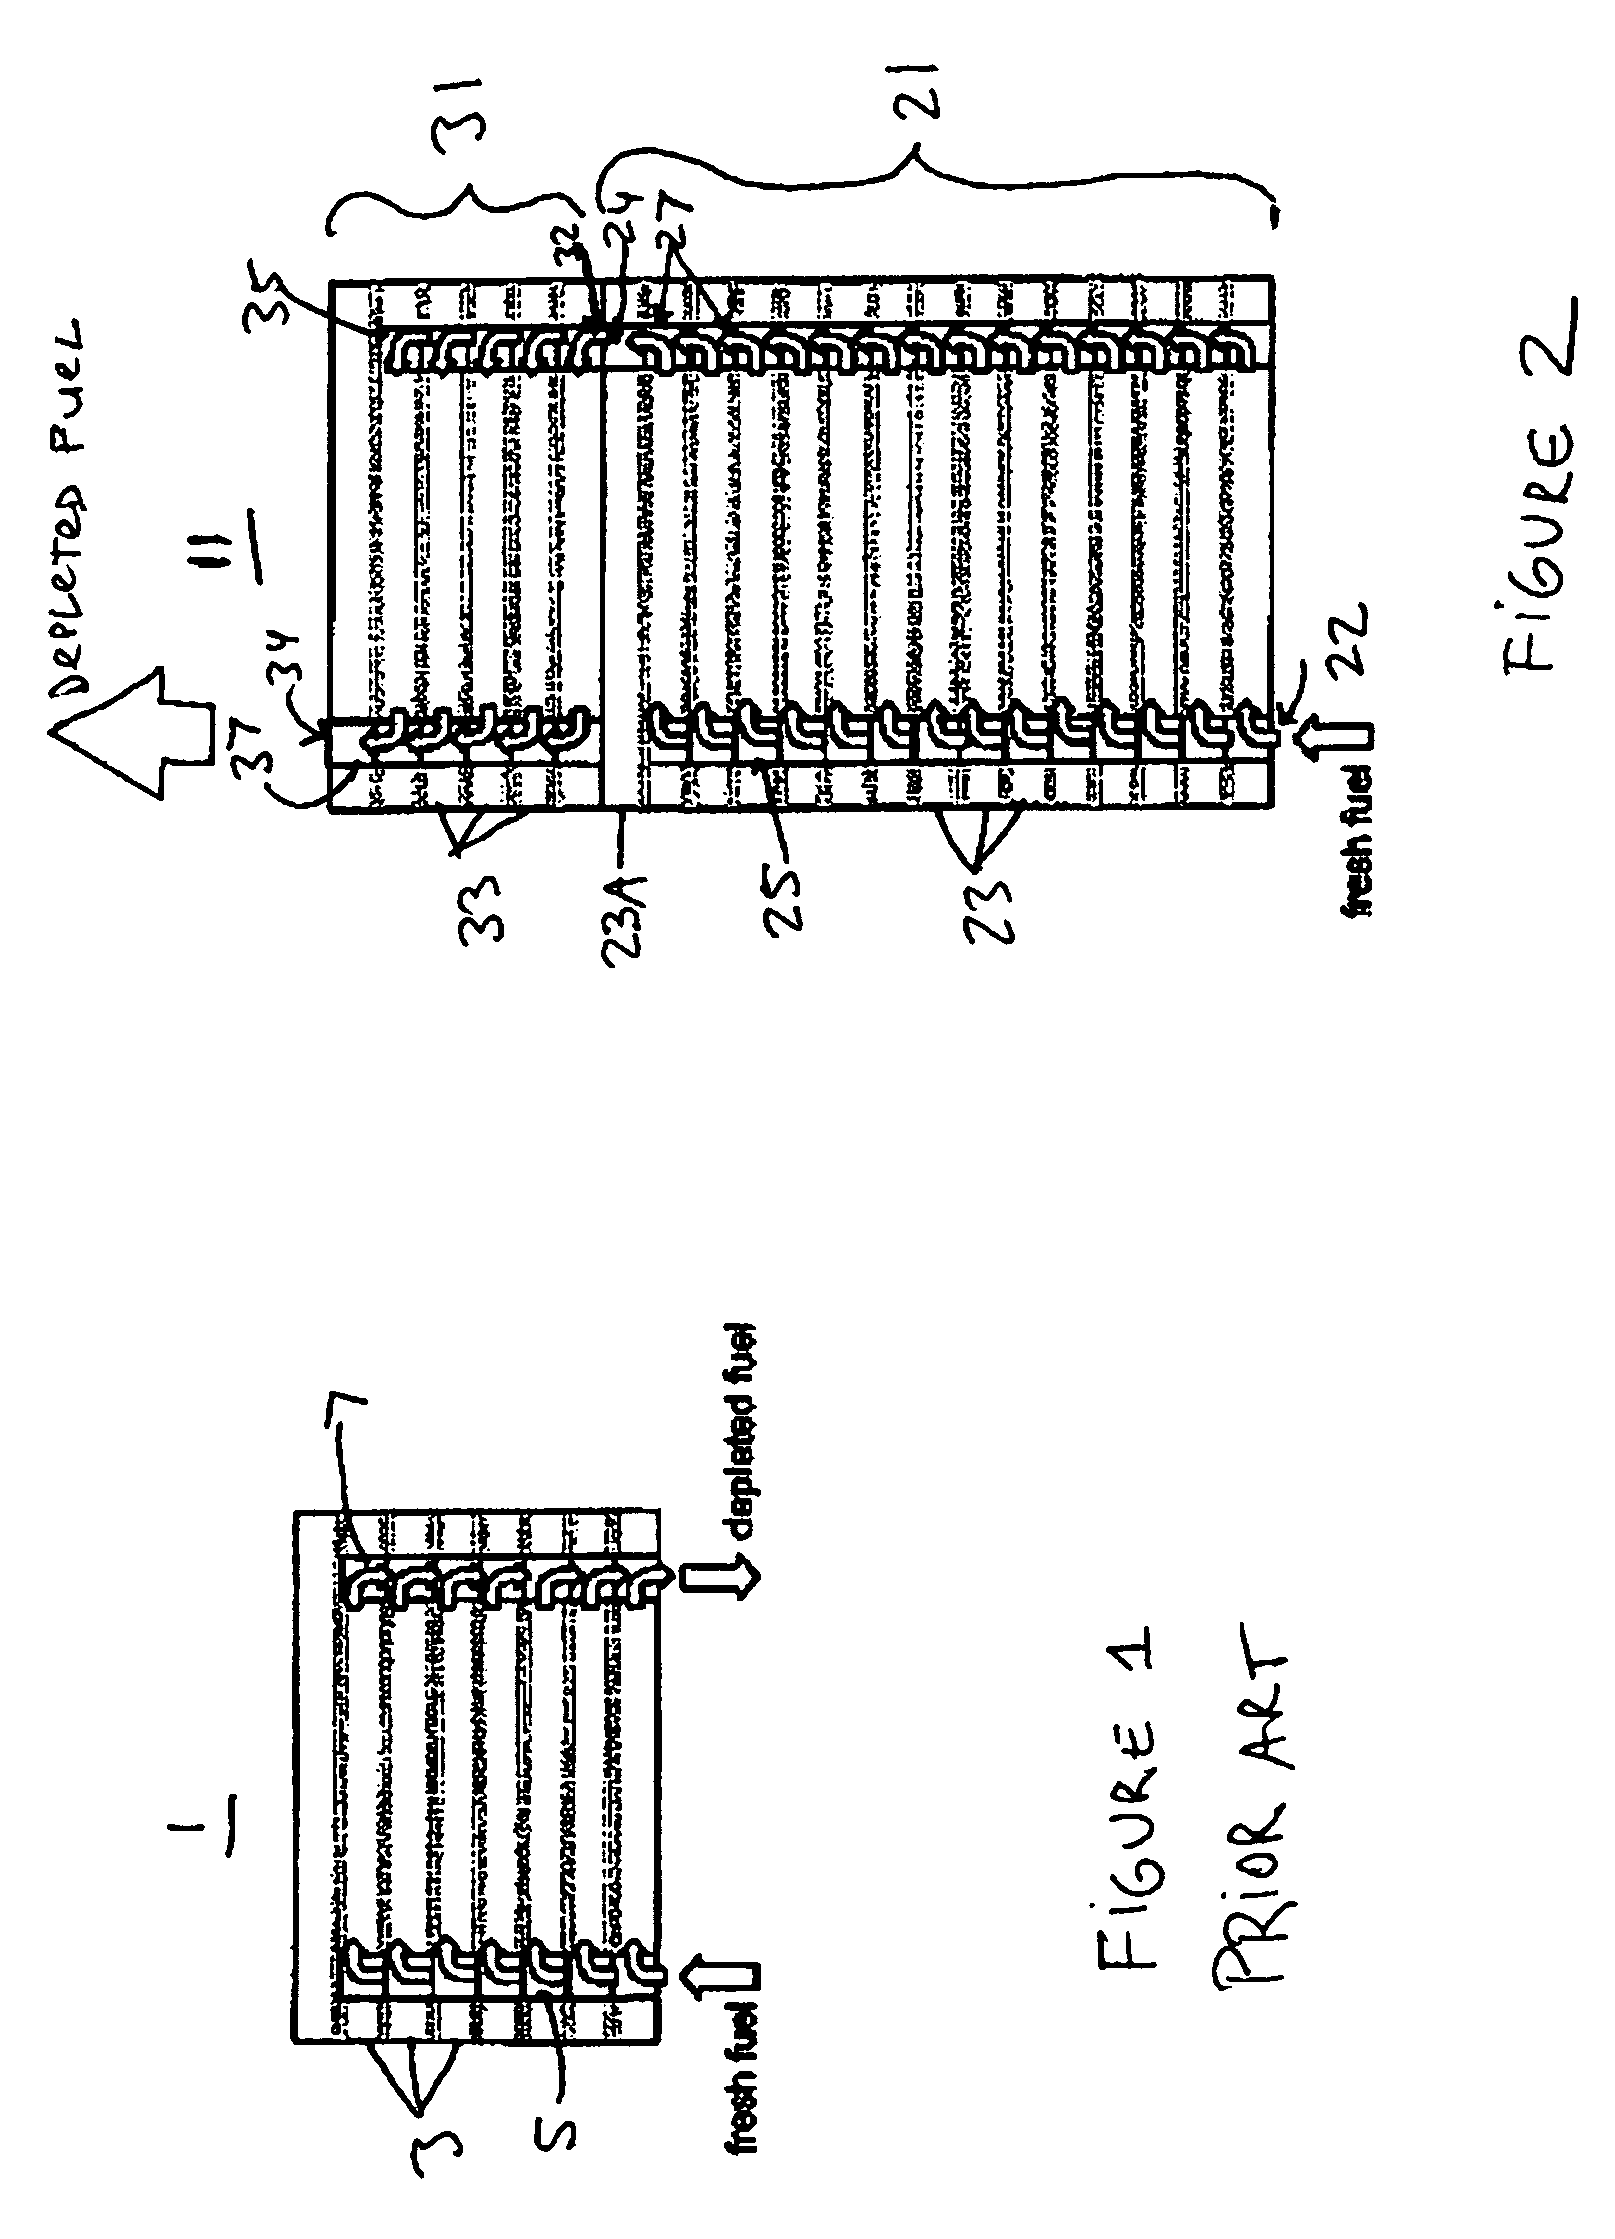 Solid oxide fuel cell column temperature equalization by internal reforming and fuel cascading